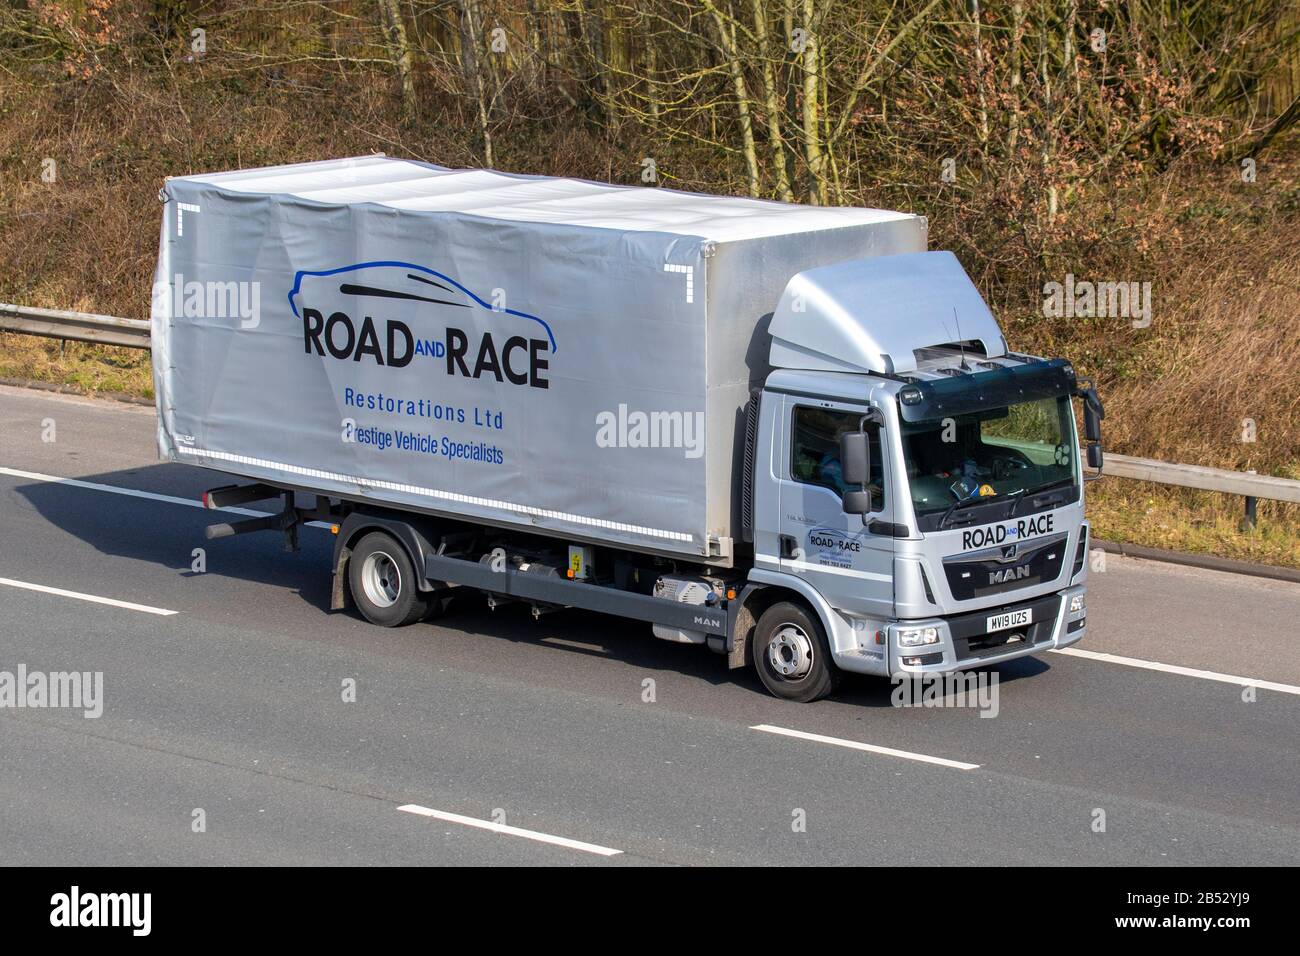 Road & Race Restorations Ltd; Haulage delivery trucks, lorry, transportation, truck, cargo carrier, MAN vehicle, European commercial transport, industry, M61 at Manchester, UK Stock Photo